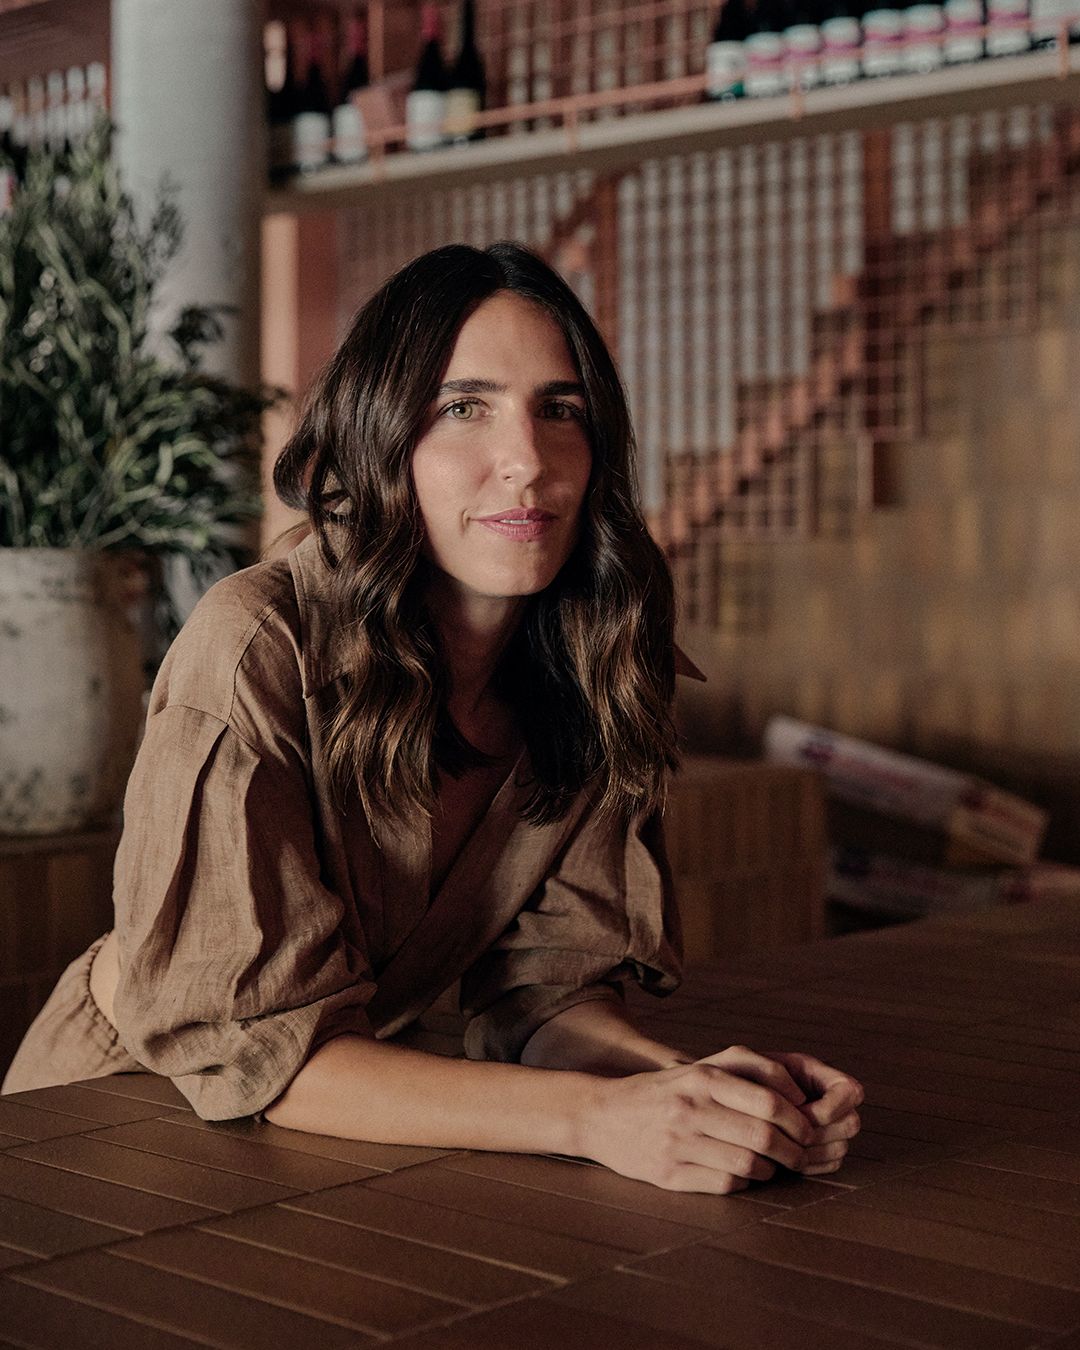 Bianca Marchi leaning over a brown tiled bench wearing a brown linen shirt